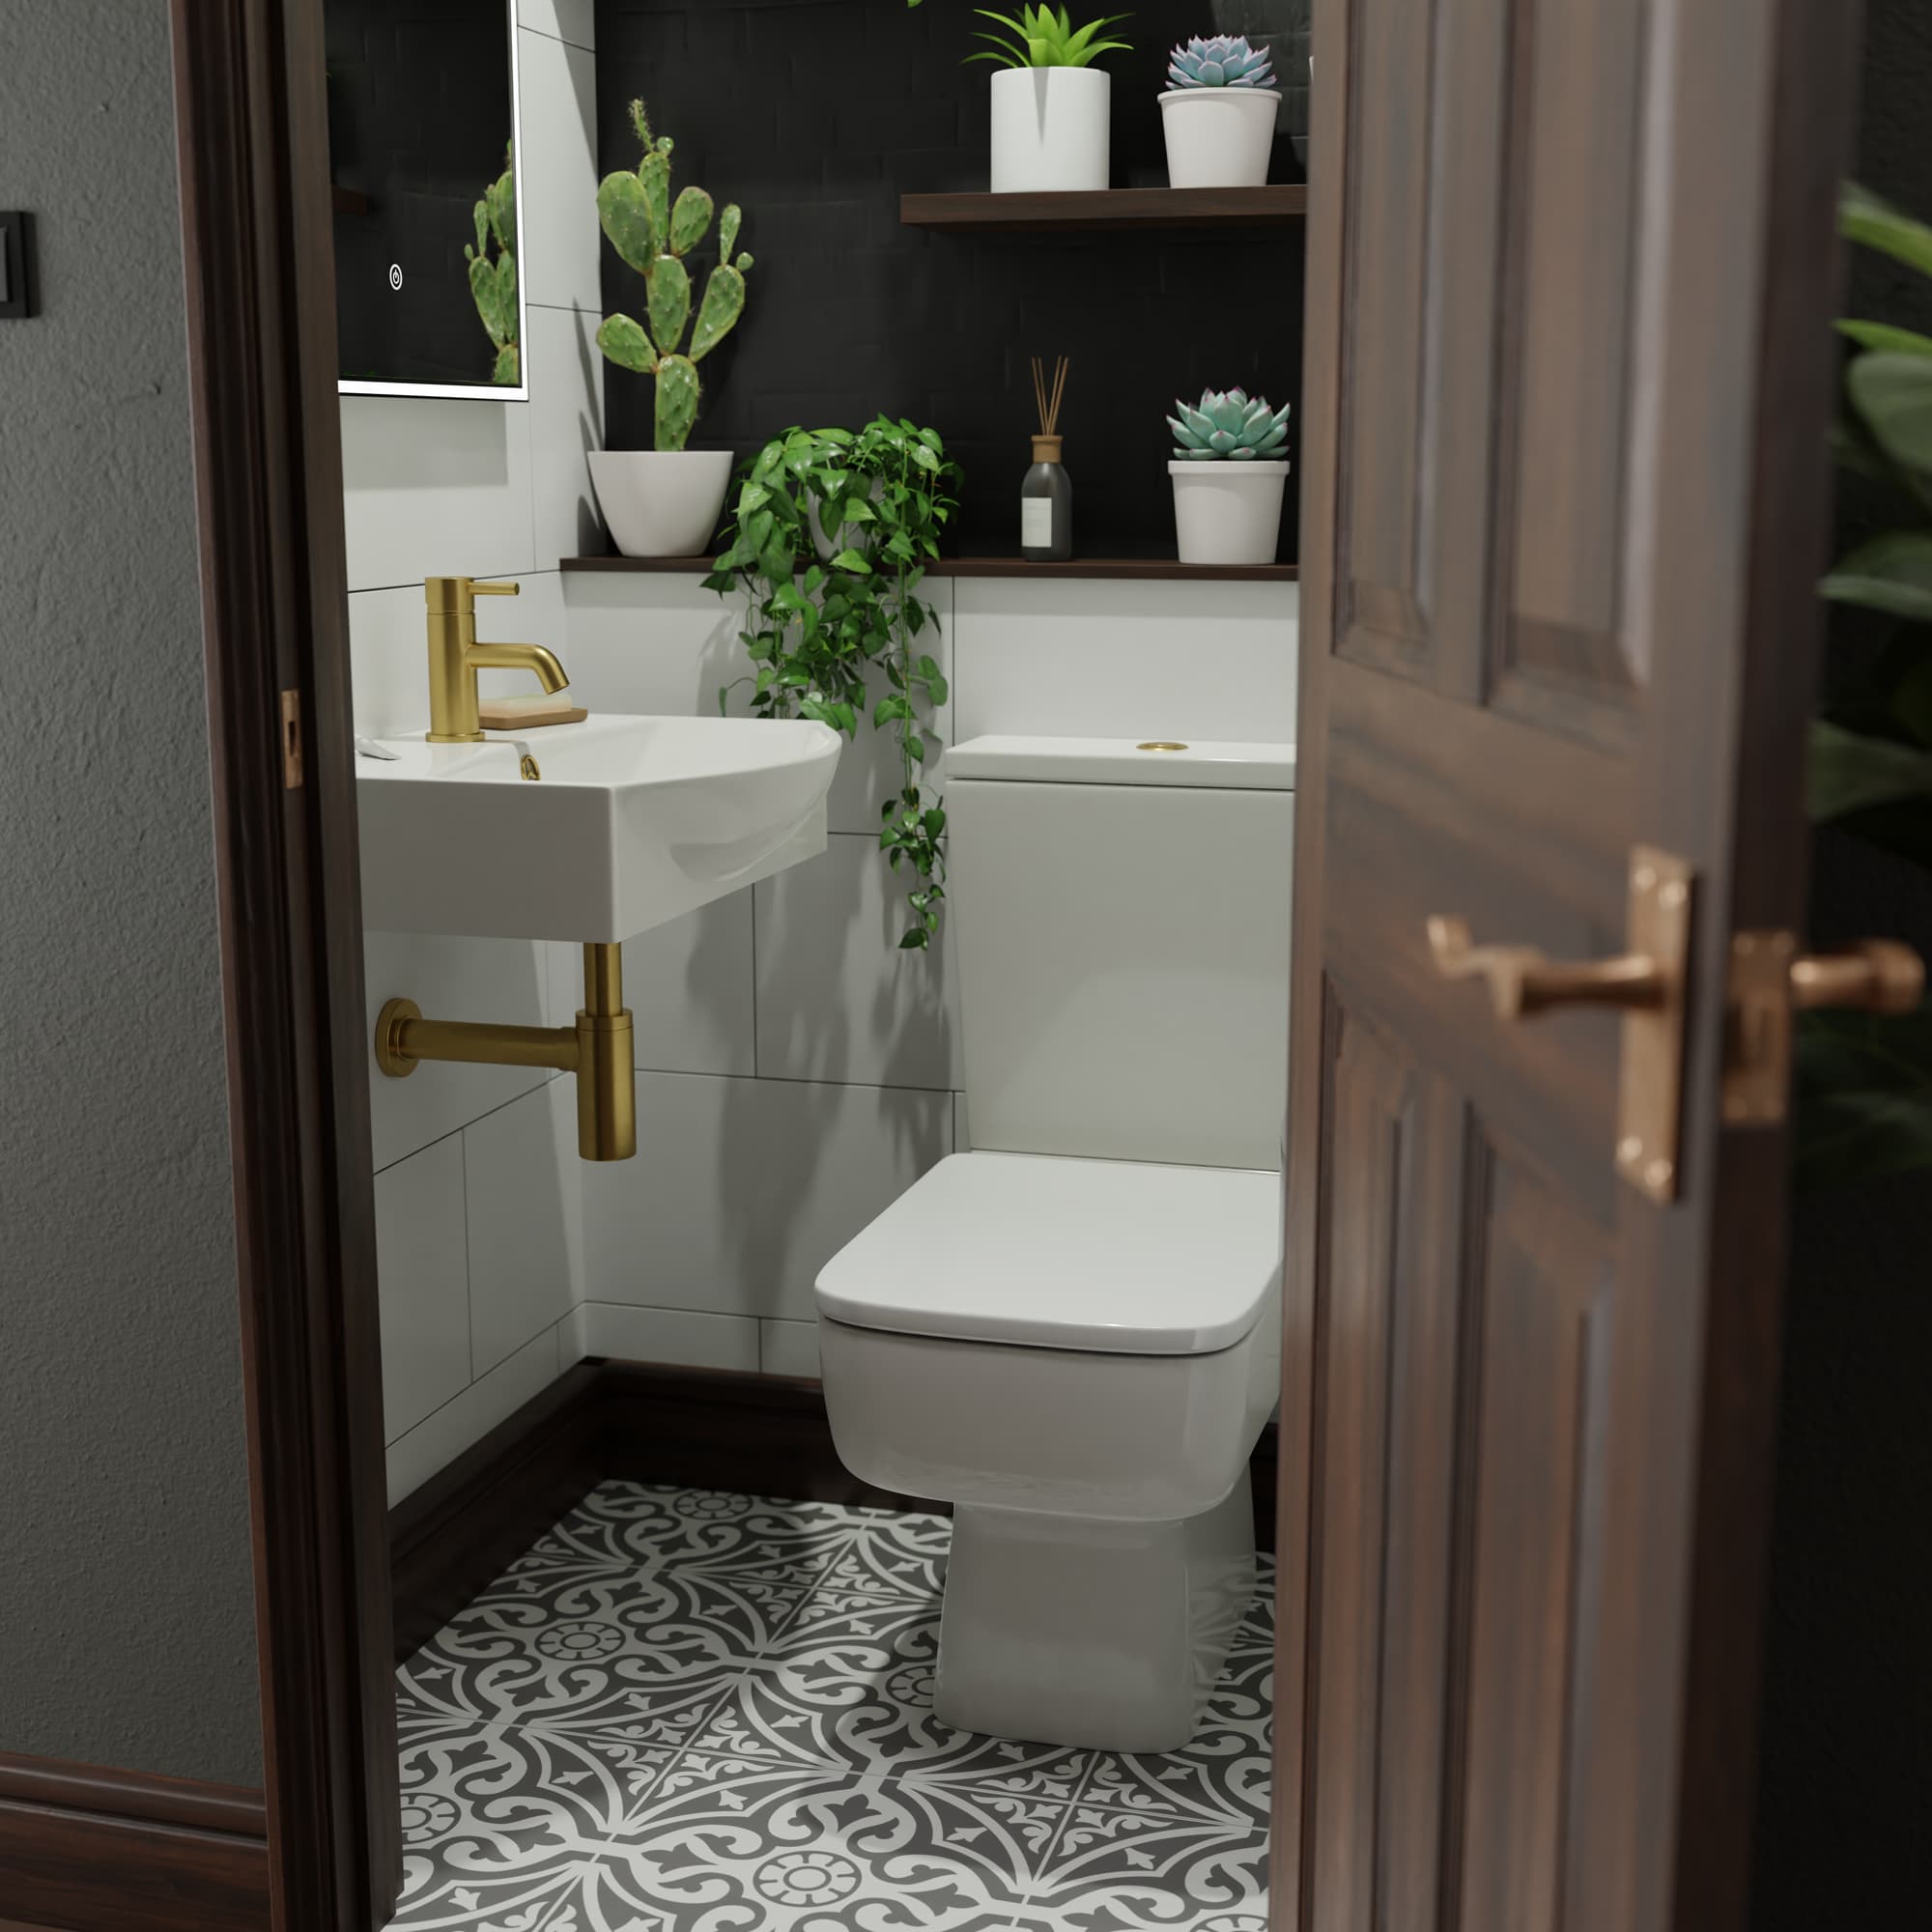 Cloakroom toilet with brass tap, greenery and mosaic tile floor